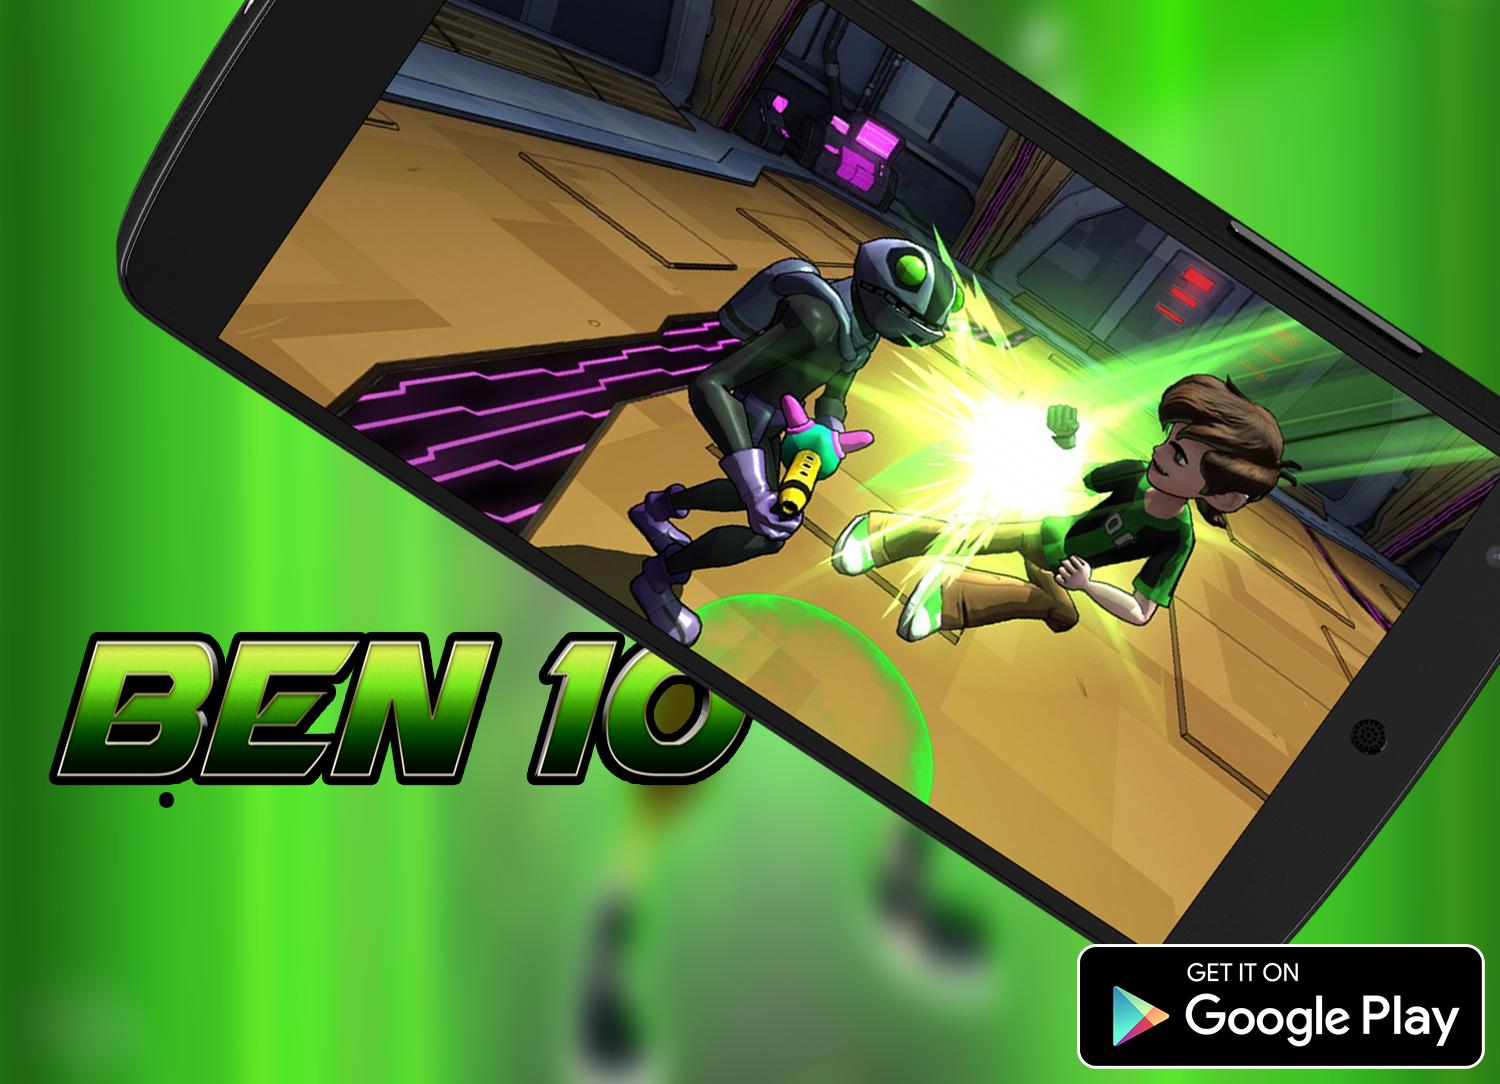 Ben The Game 10 for Android - APK Download